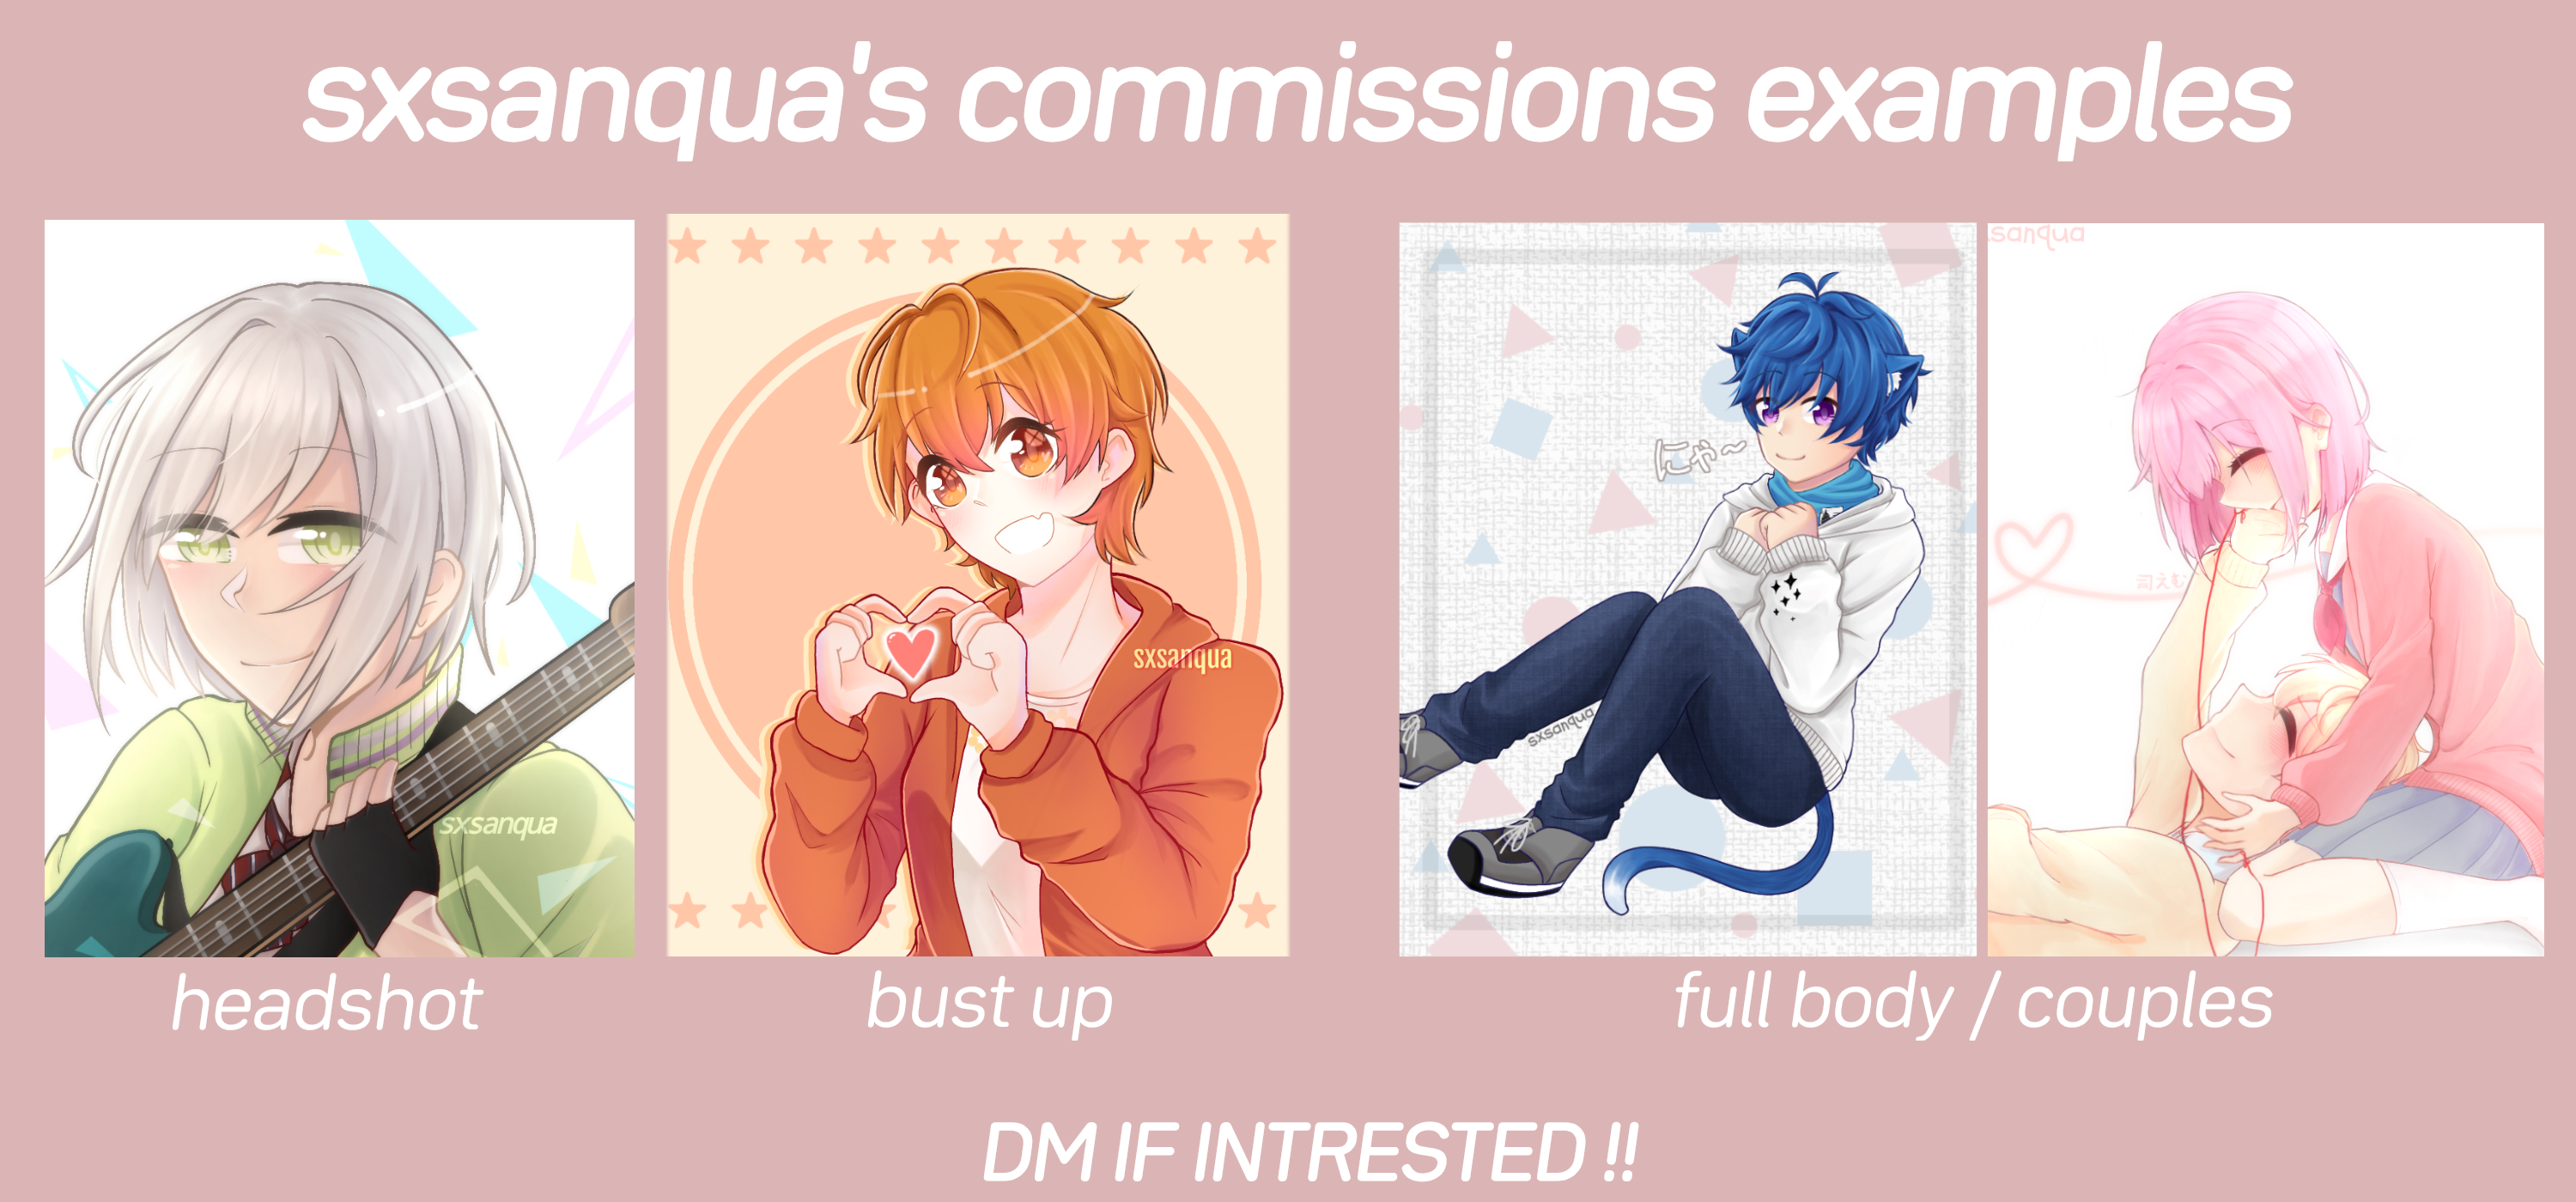 commissions.png